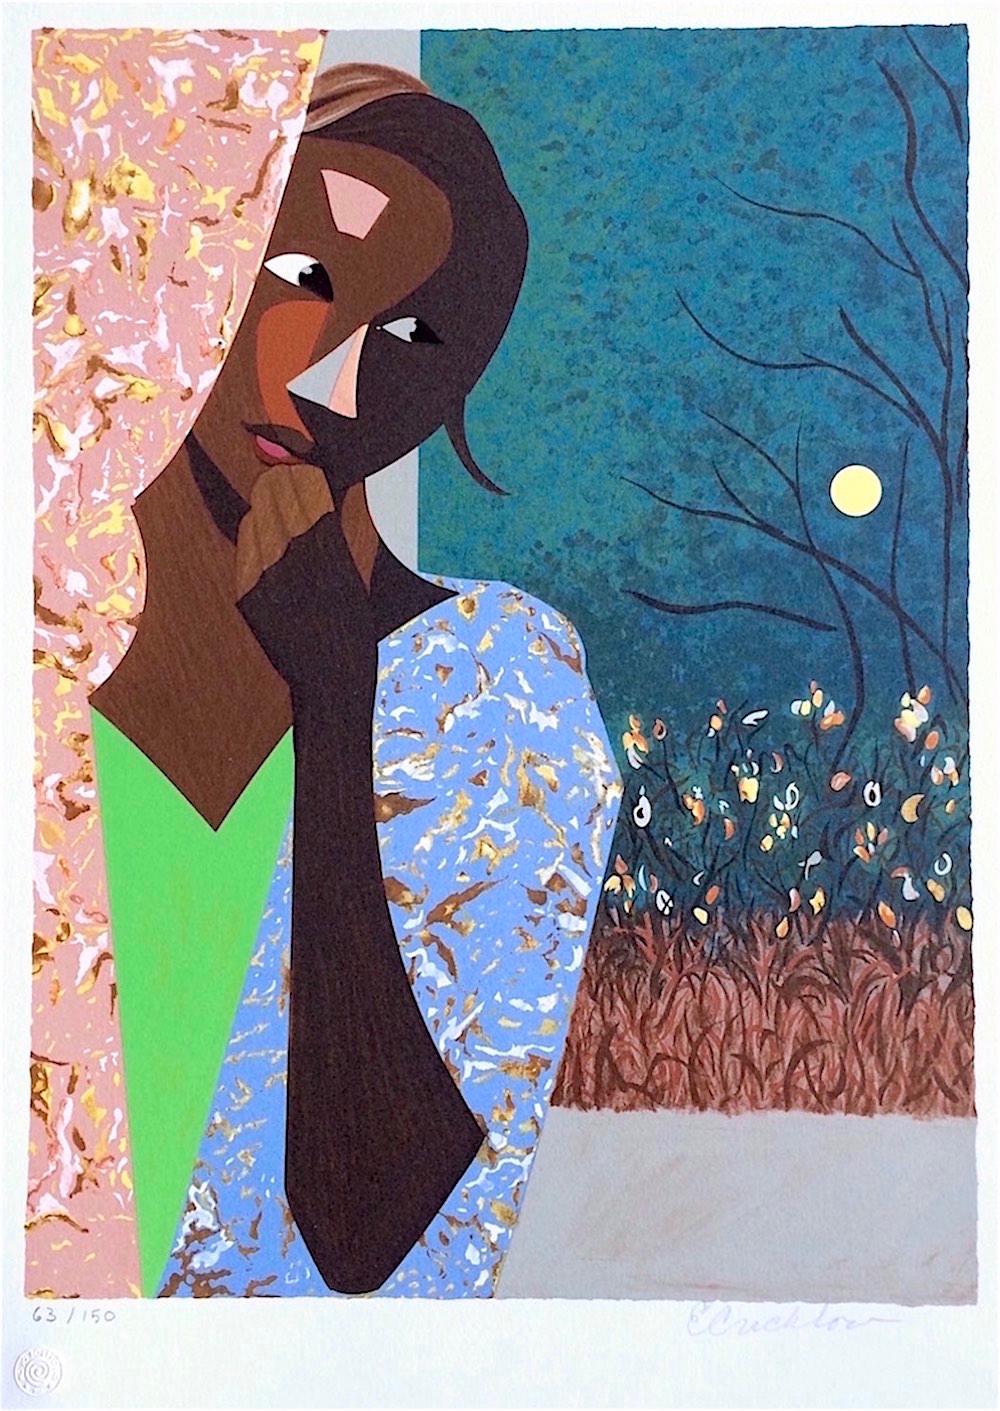 EVENING THOUGHTS Signed Lithograph, Young Black Female Portrait, Color Collage - Print by Ernest Crichlow